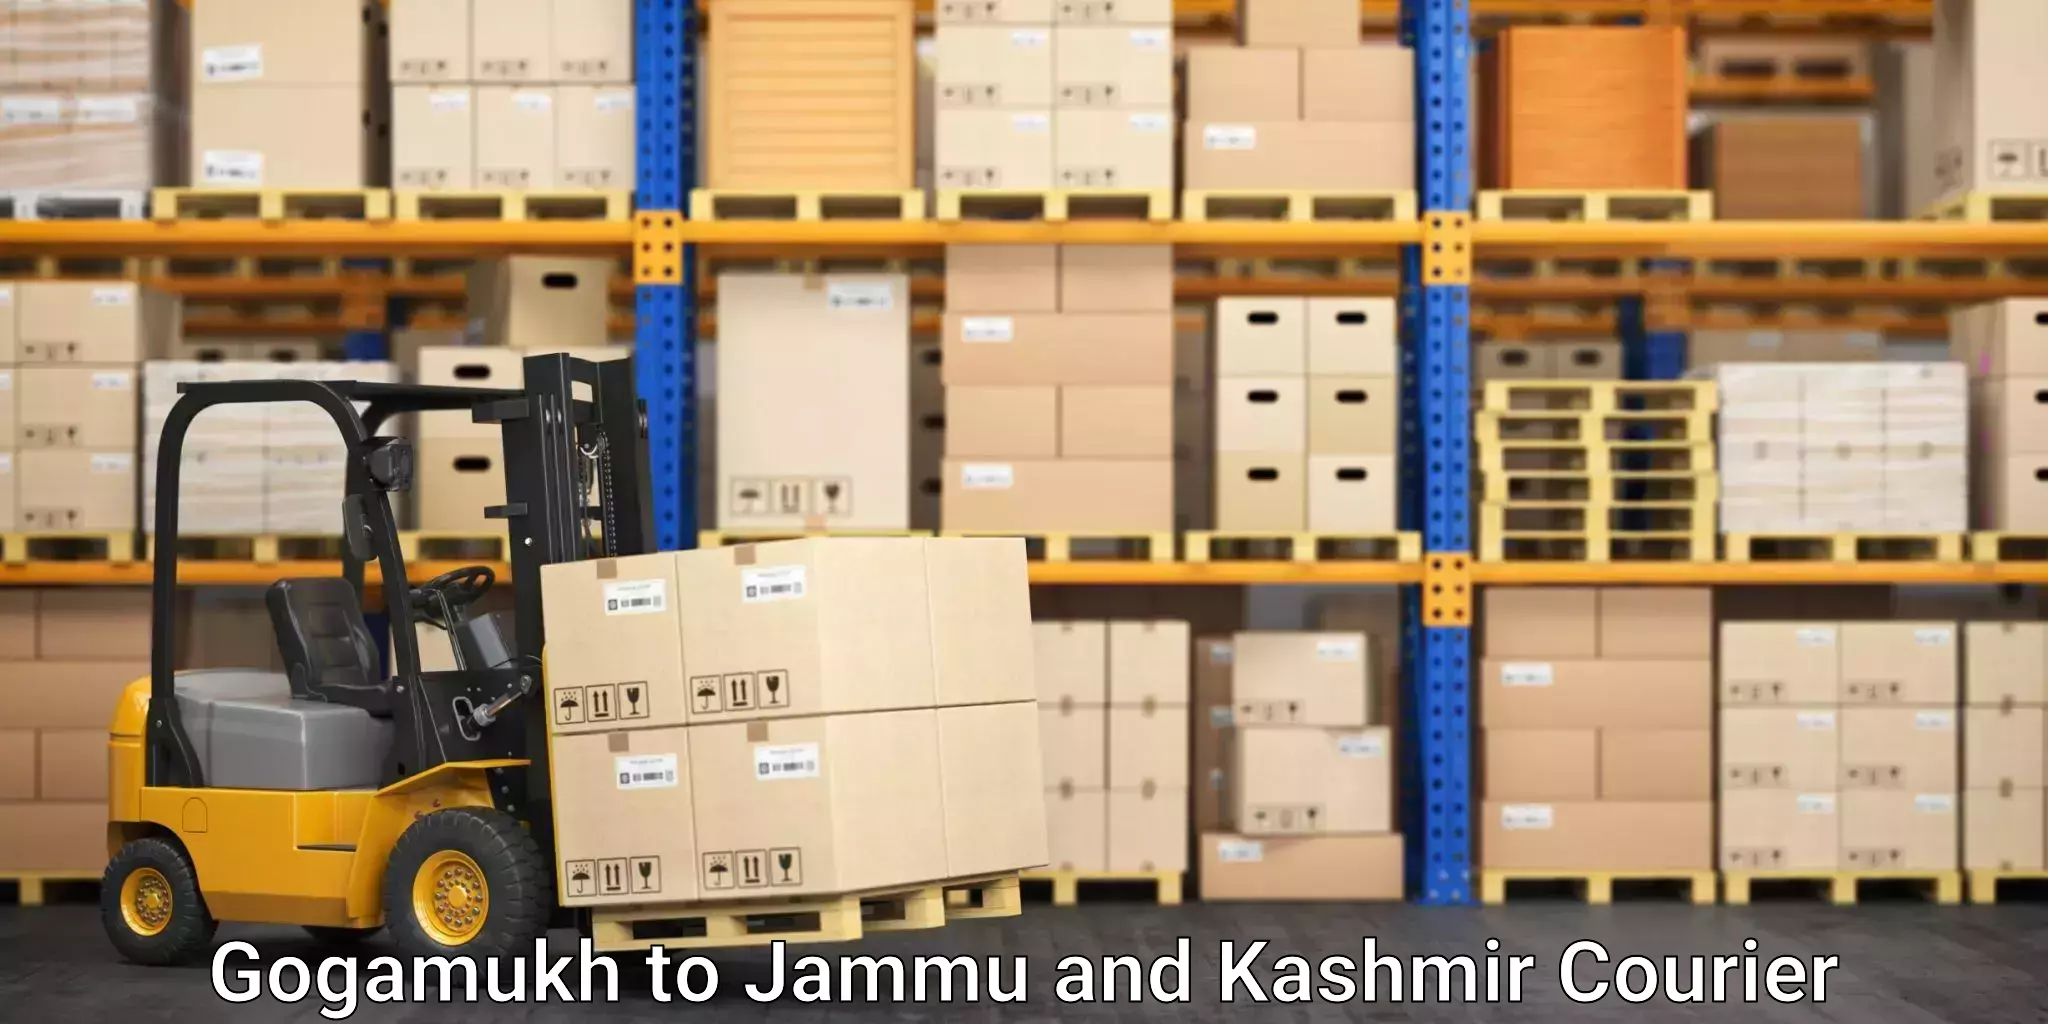 Specialized courier services Gogamukh to Jammu and Kashmir